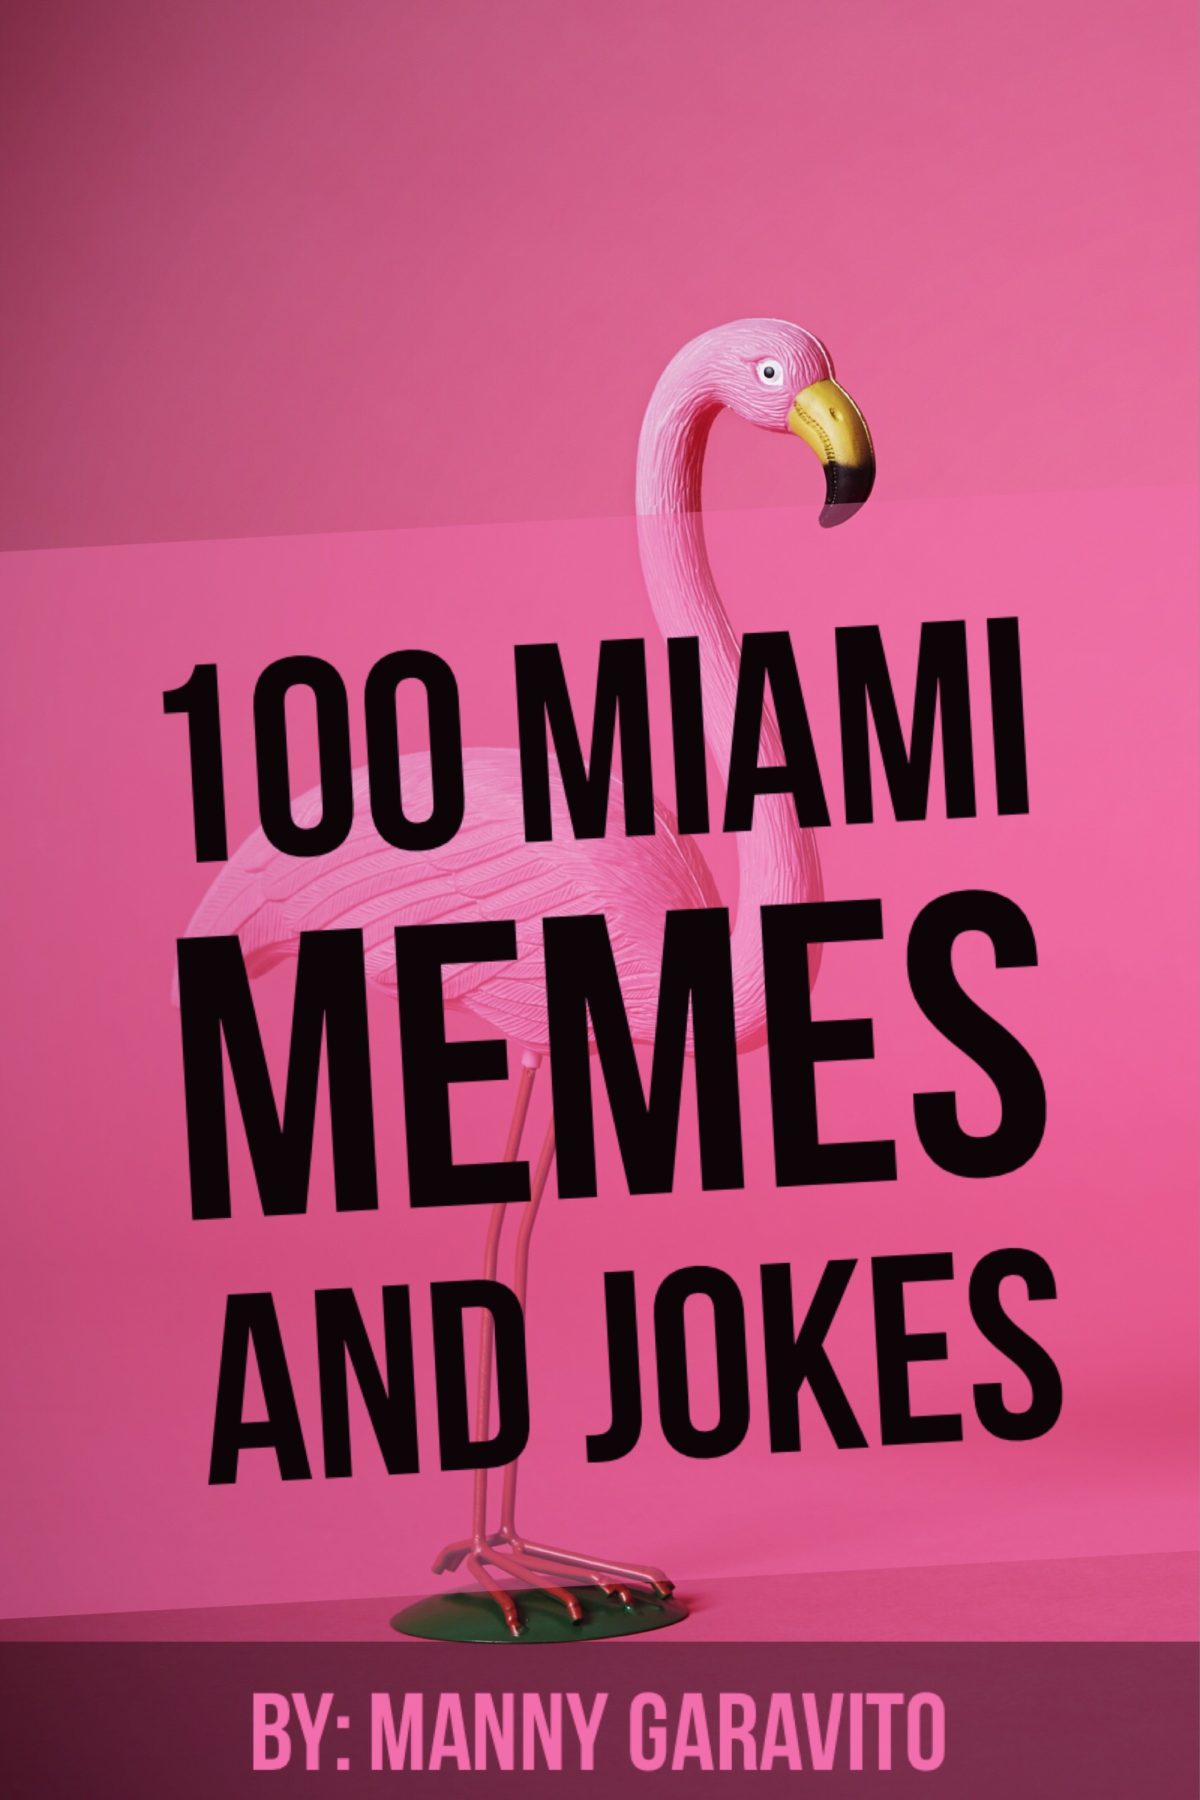 New Miami Comedy E-Book Available to our Members